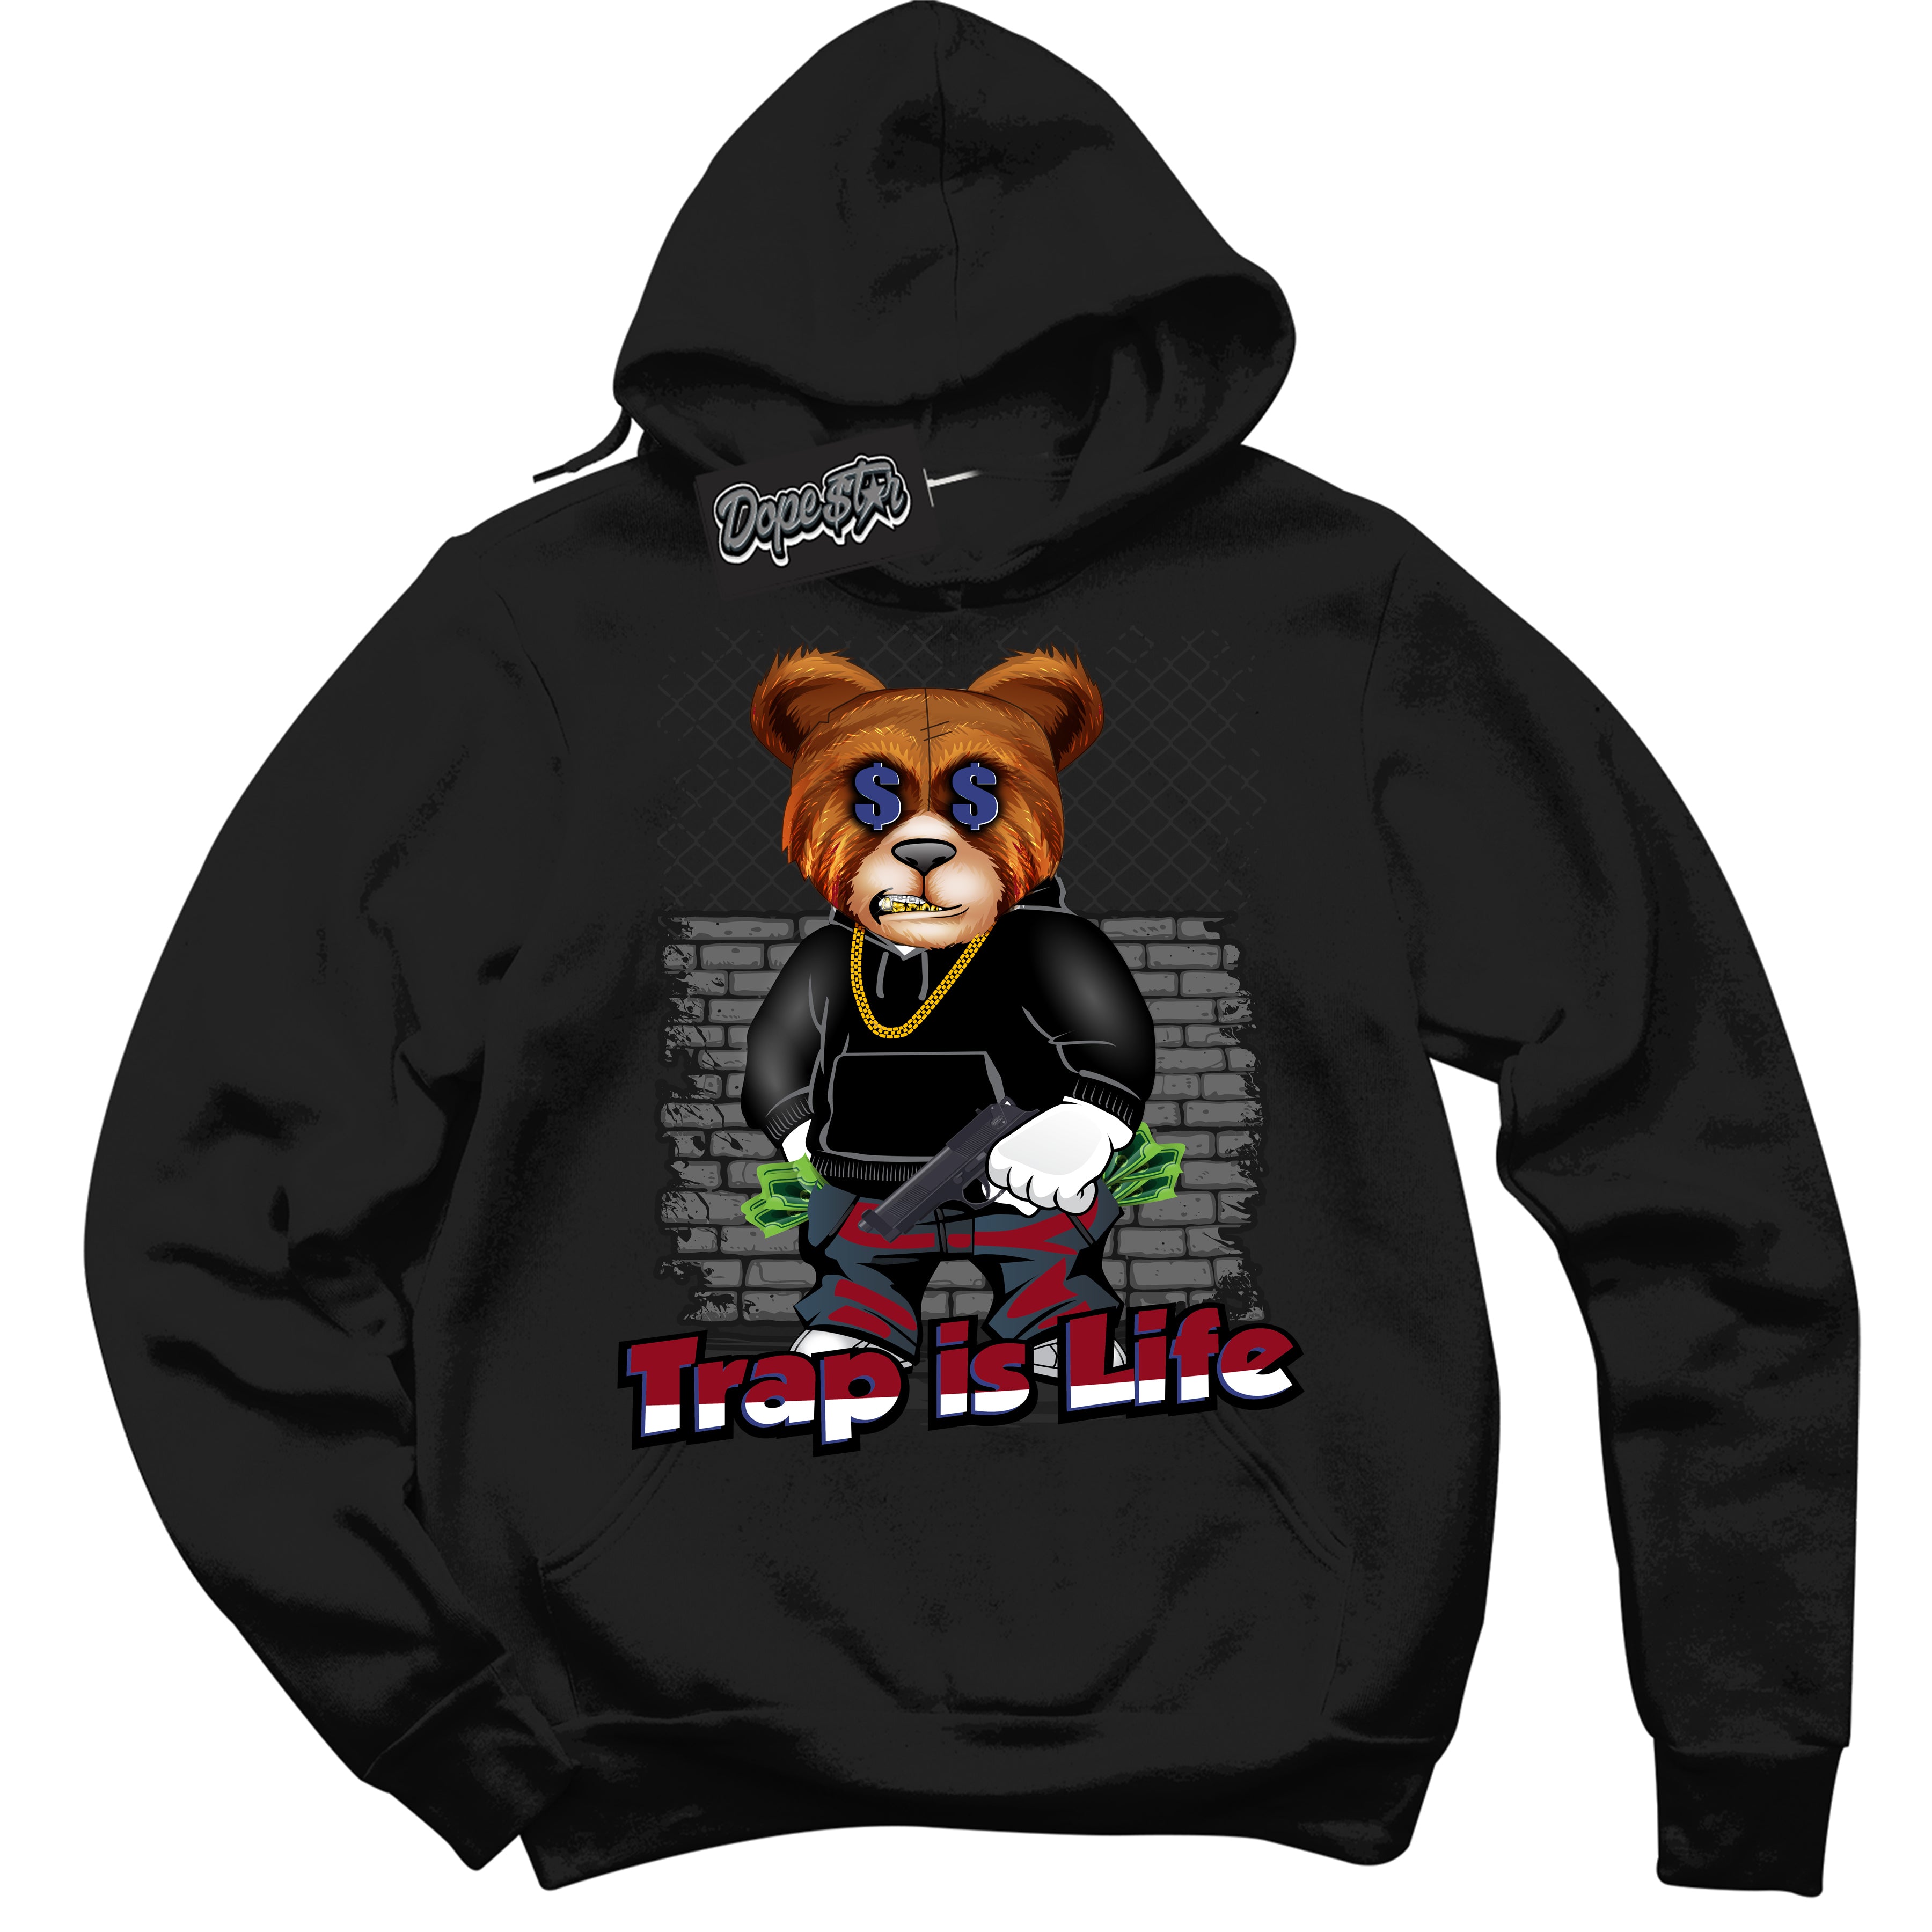 Cool Black Hoodie with “ Trap Is Life ”  design that Perfectly Matches Playoffs 8s Sneakers.